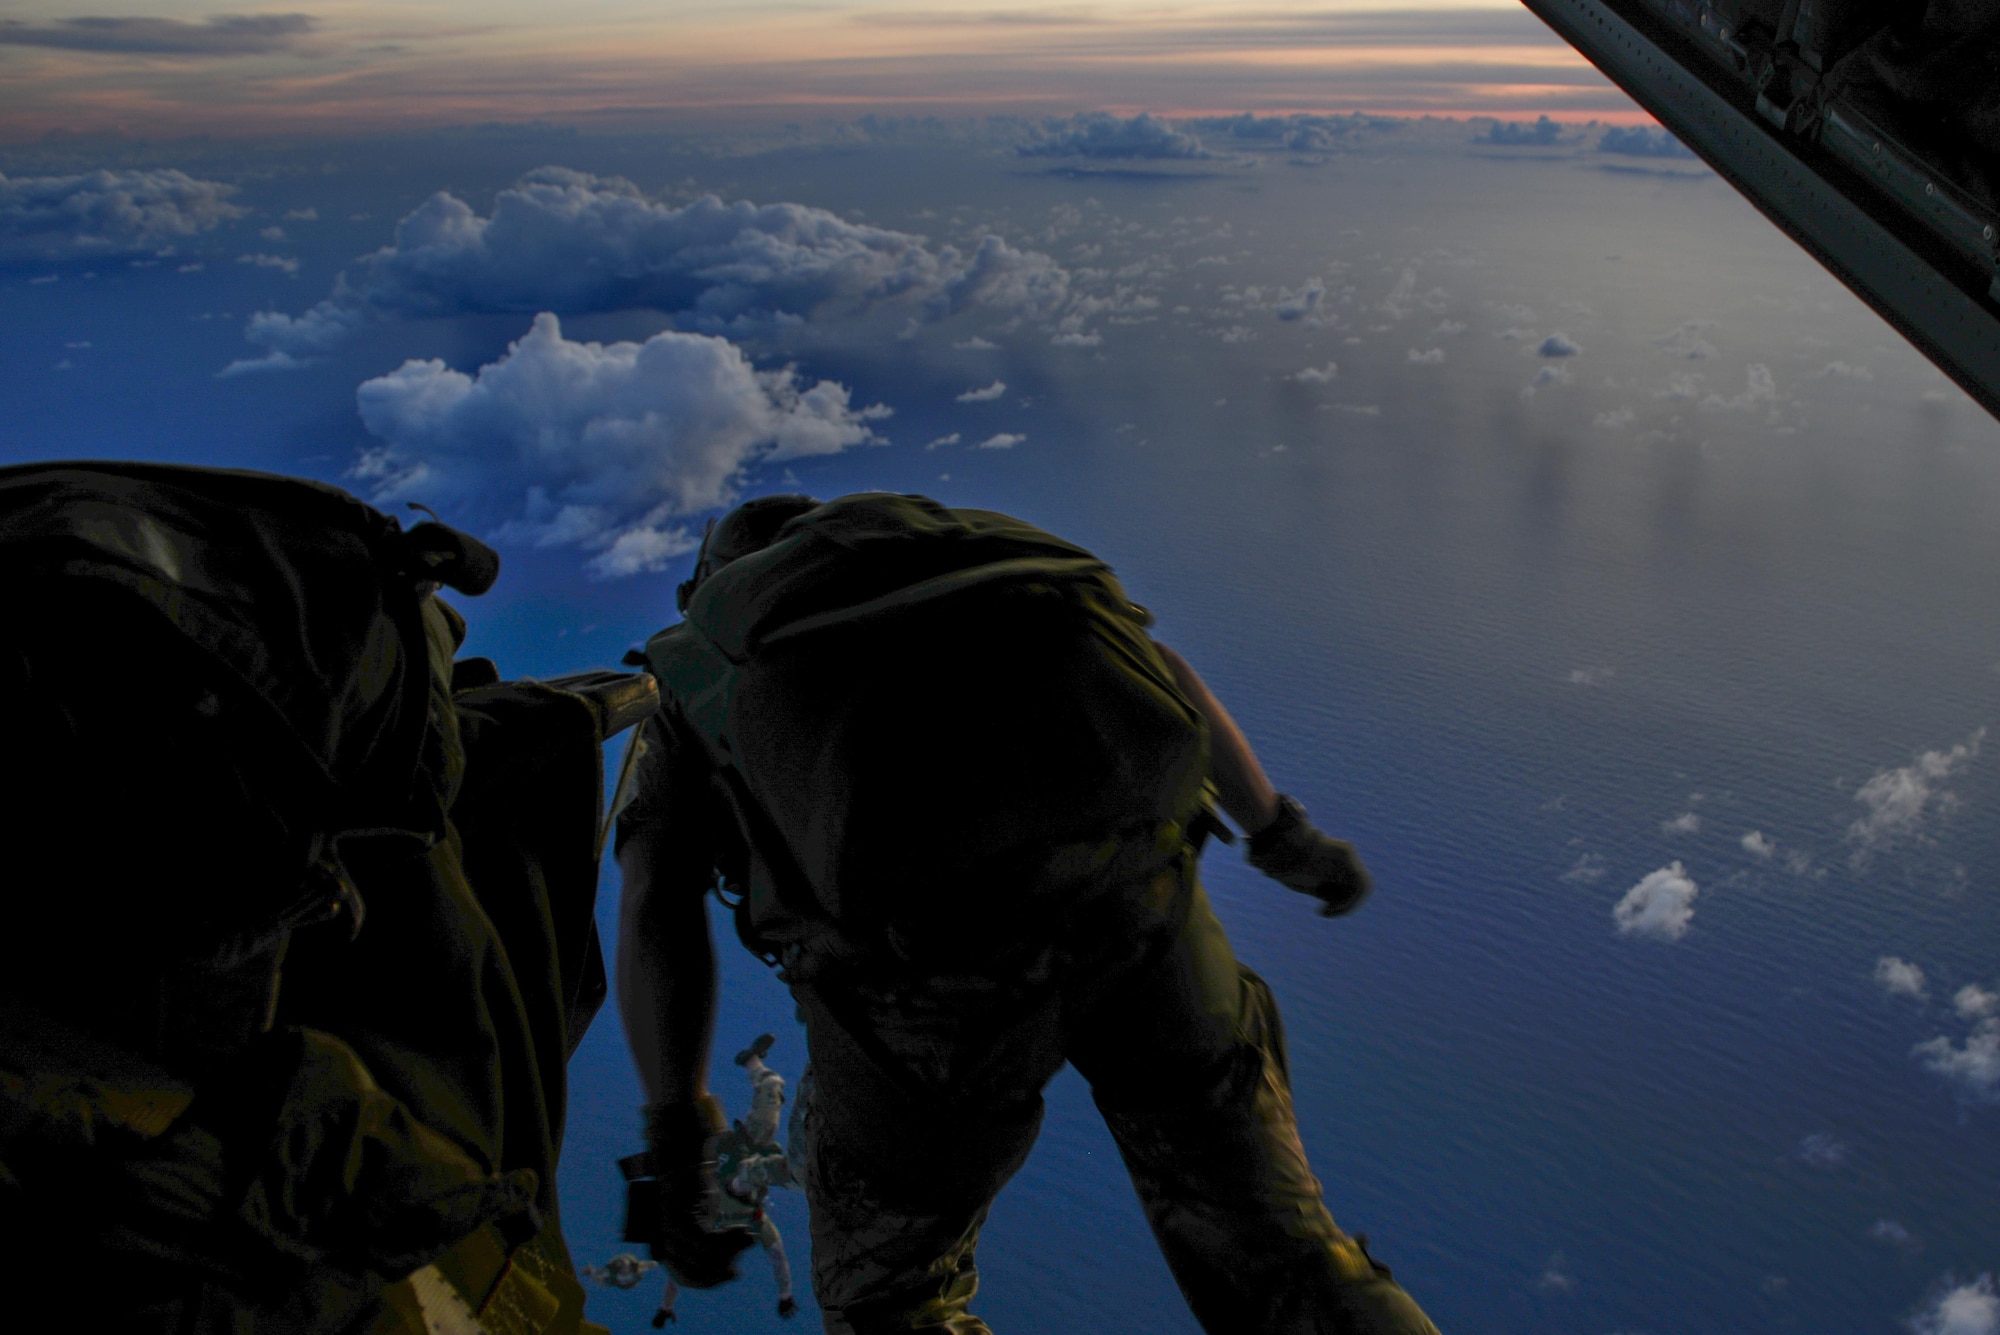 A 320th Special Tactics Squadron member, jumps from an MC-130J Commando II from the 17th Special Operations Squadron during an airfield seizure exercise Aug. 24, at Wake Island. The realistic training of the operations conducted allowed the units to address any issues before taking on any real world tasking. (U.S. Air Force photo by Senior Airmen Stephen G. Eigel)